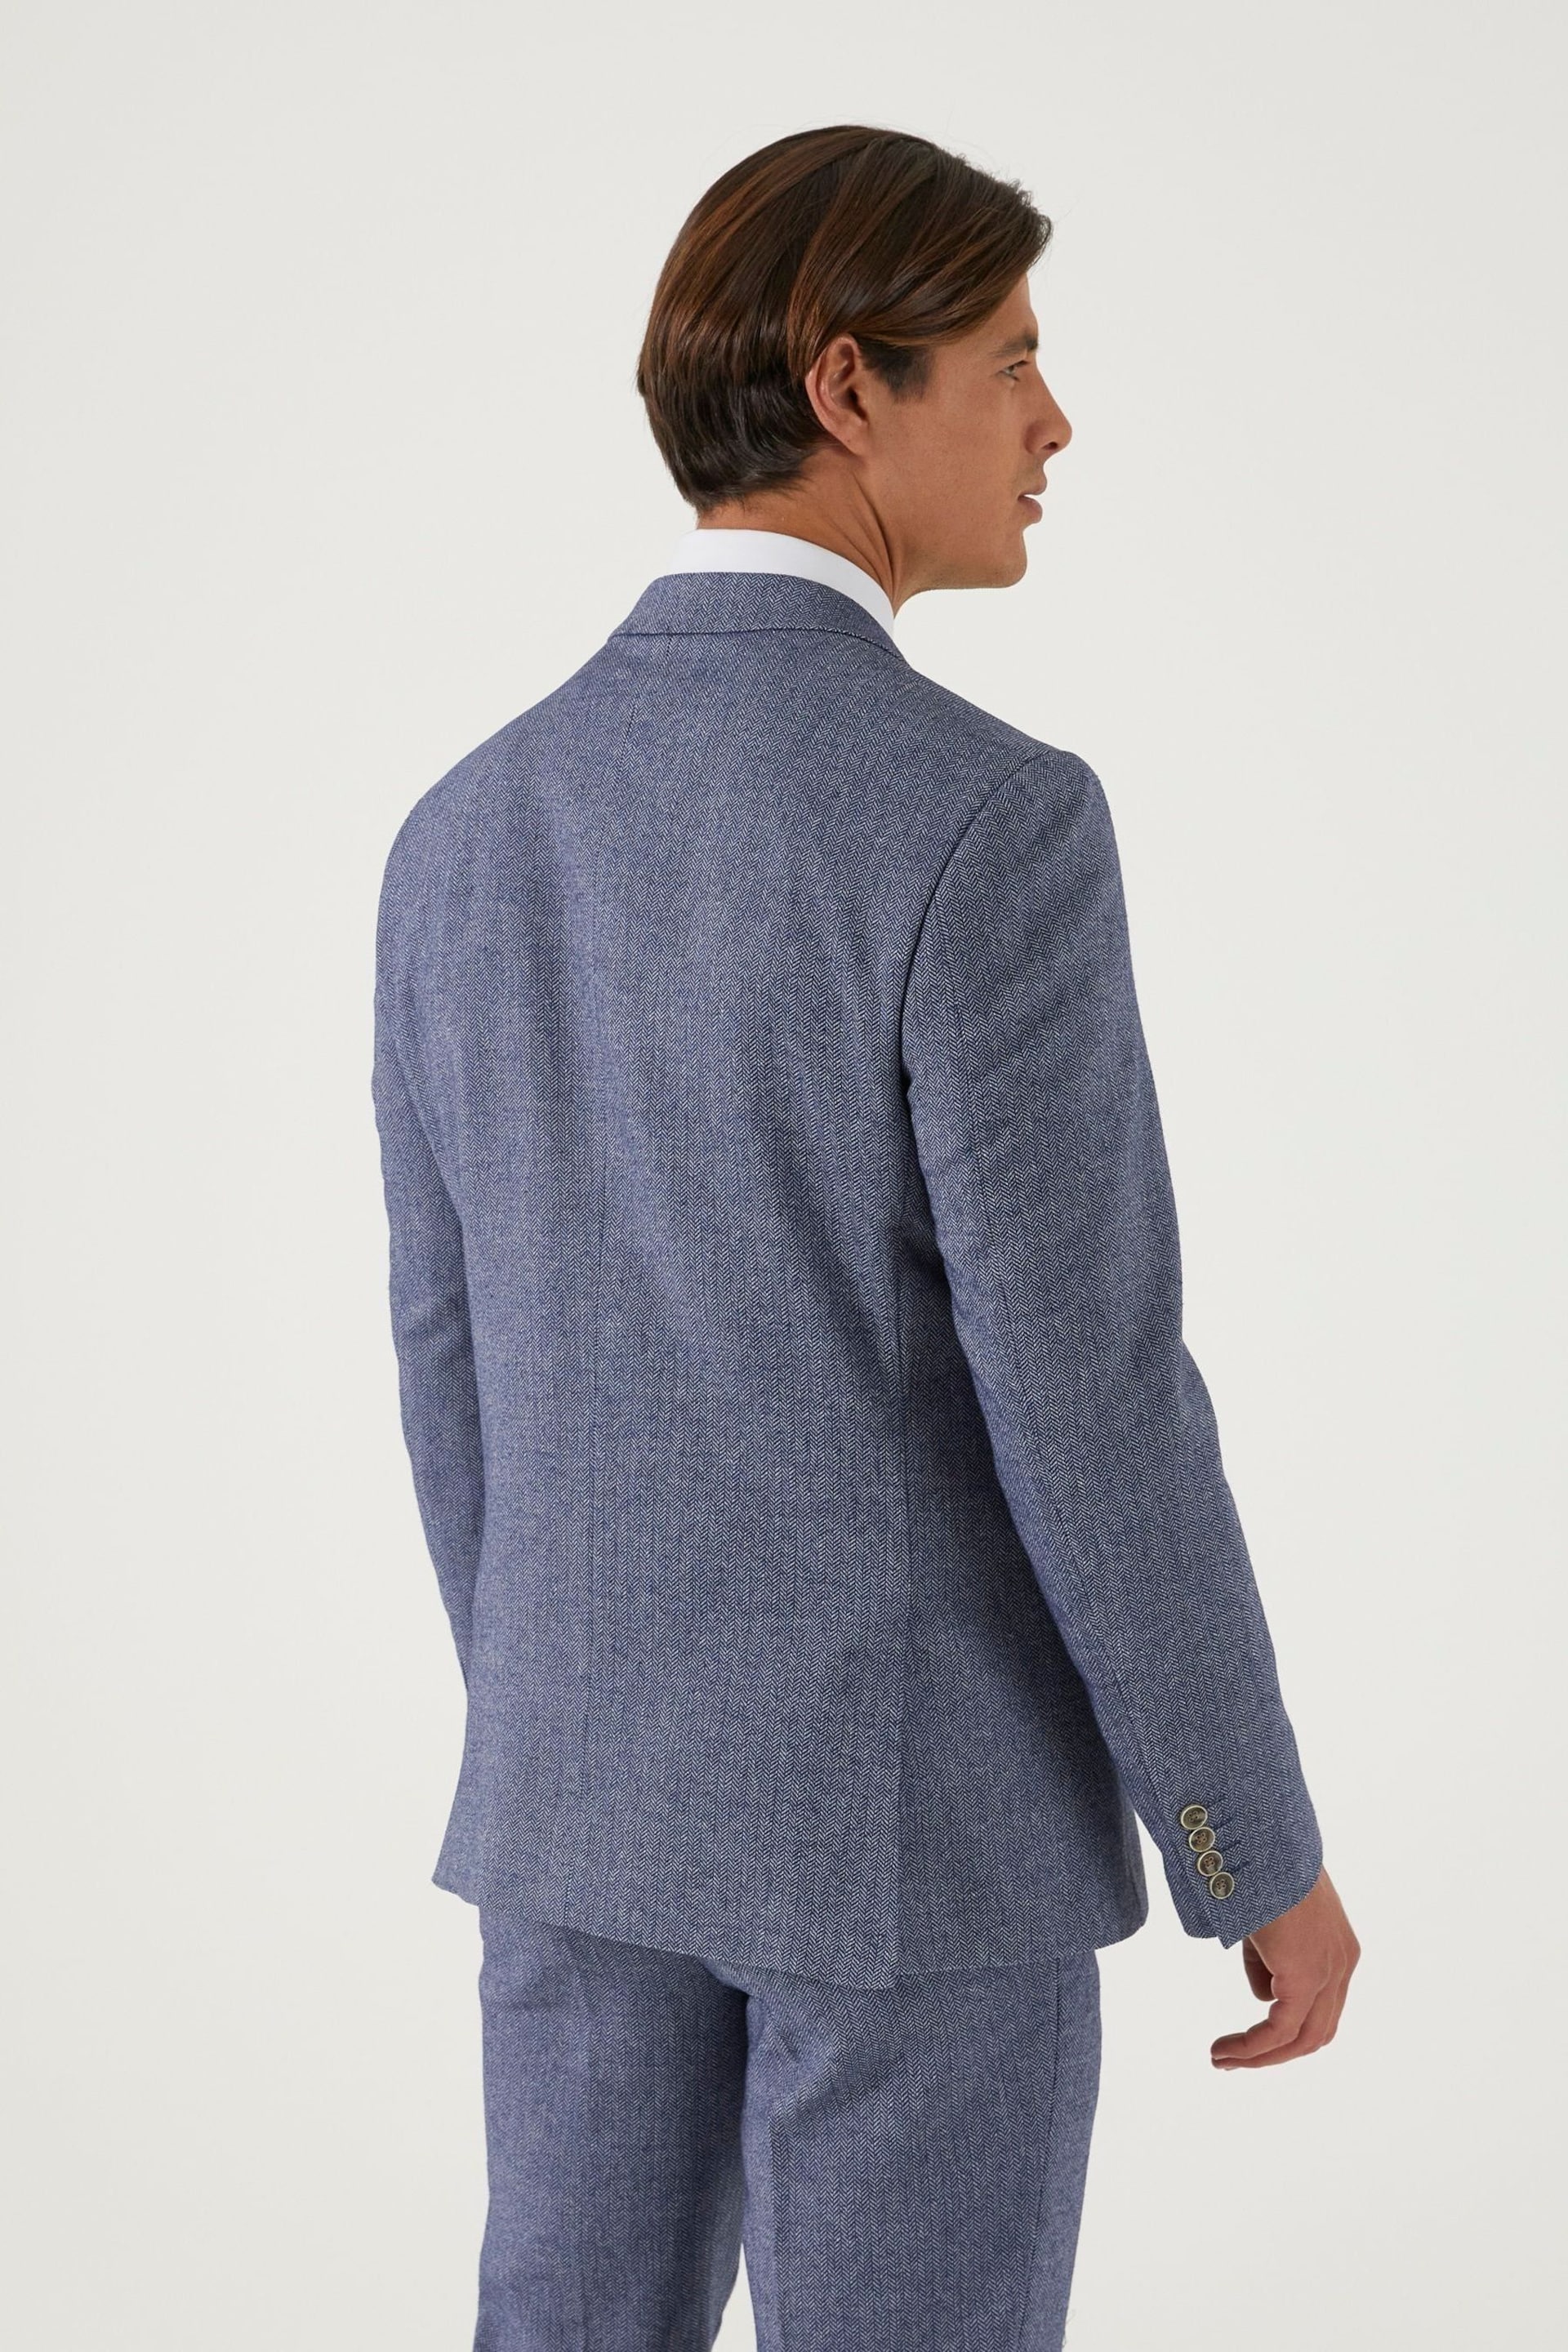 Skopes Tailored Fit Blue Herringbone Double Breasted Suit: Jacket - Image 5 of 9